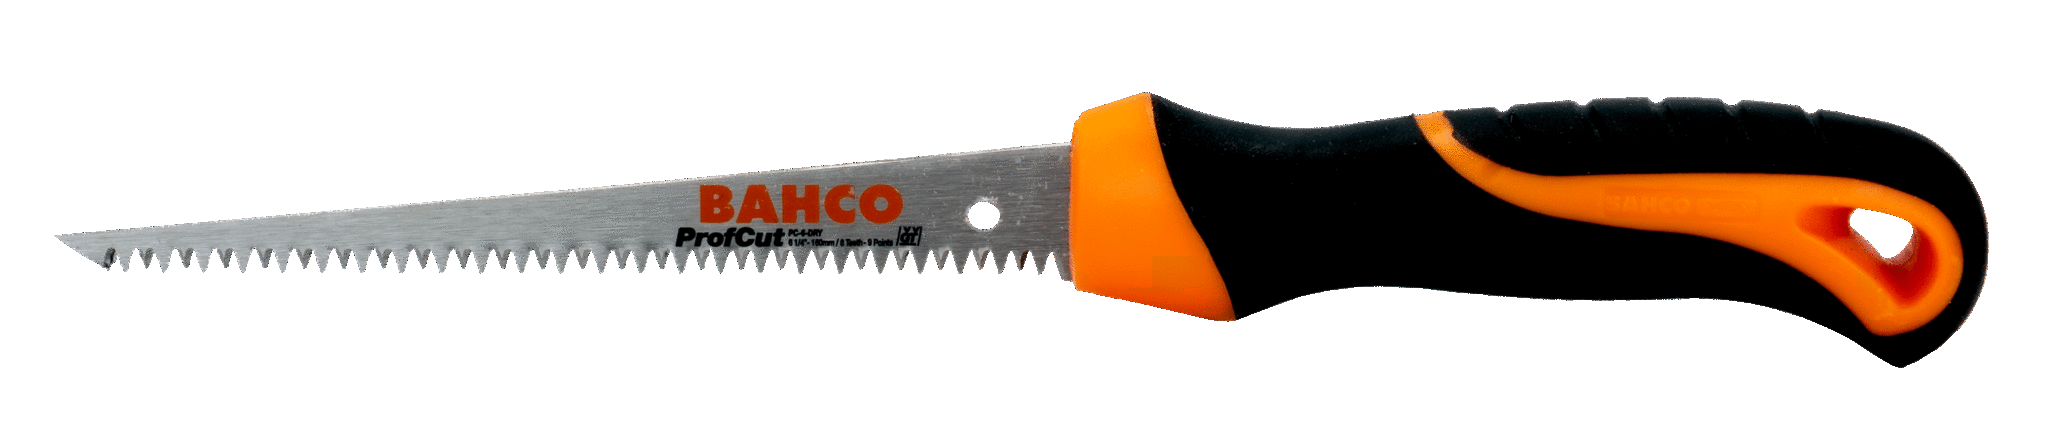 Compass Saws for Plaster/Drywall/Boards of Wood Based Materials - PC-6-DRY by Bahco